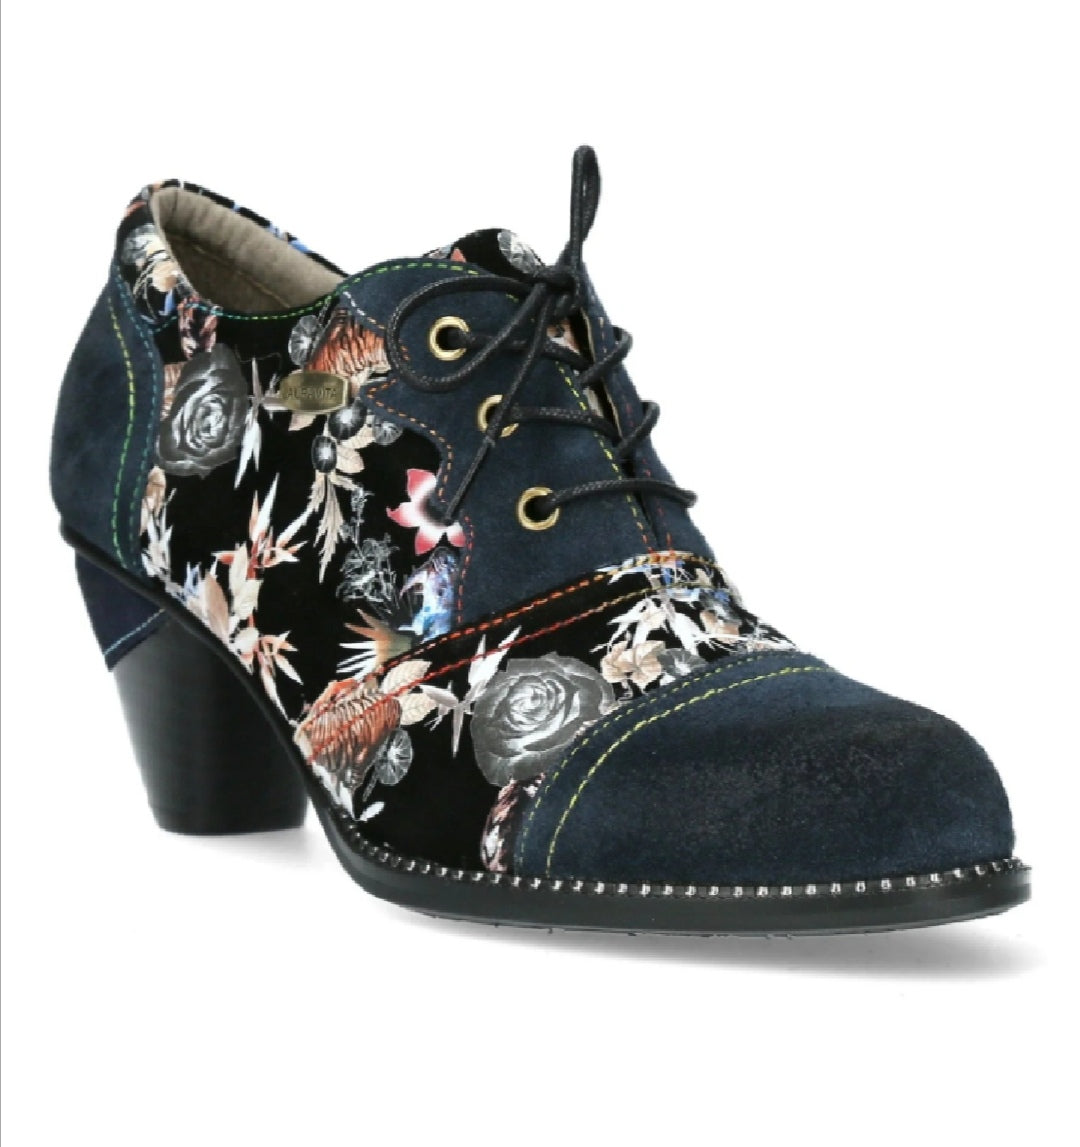 Laura Vita Alcizeeo 221 Blue Bleu Lace Up Shoe Boot with Side Zip and Mid Heel.